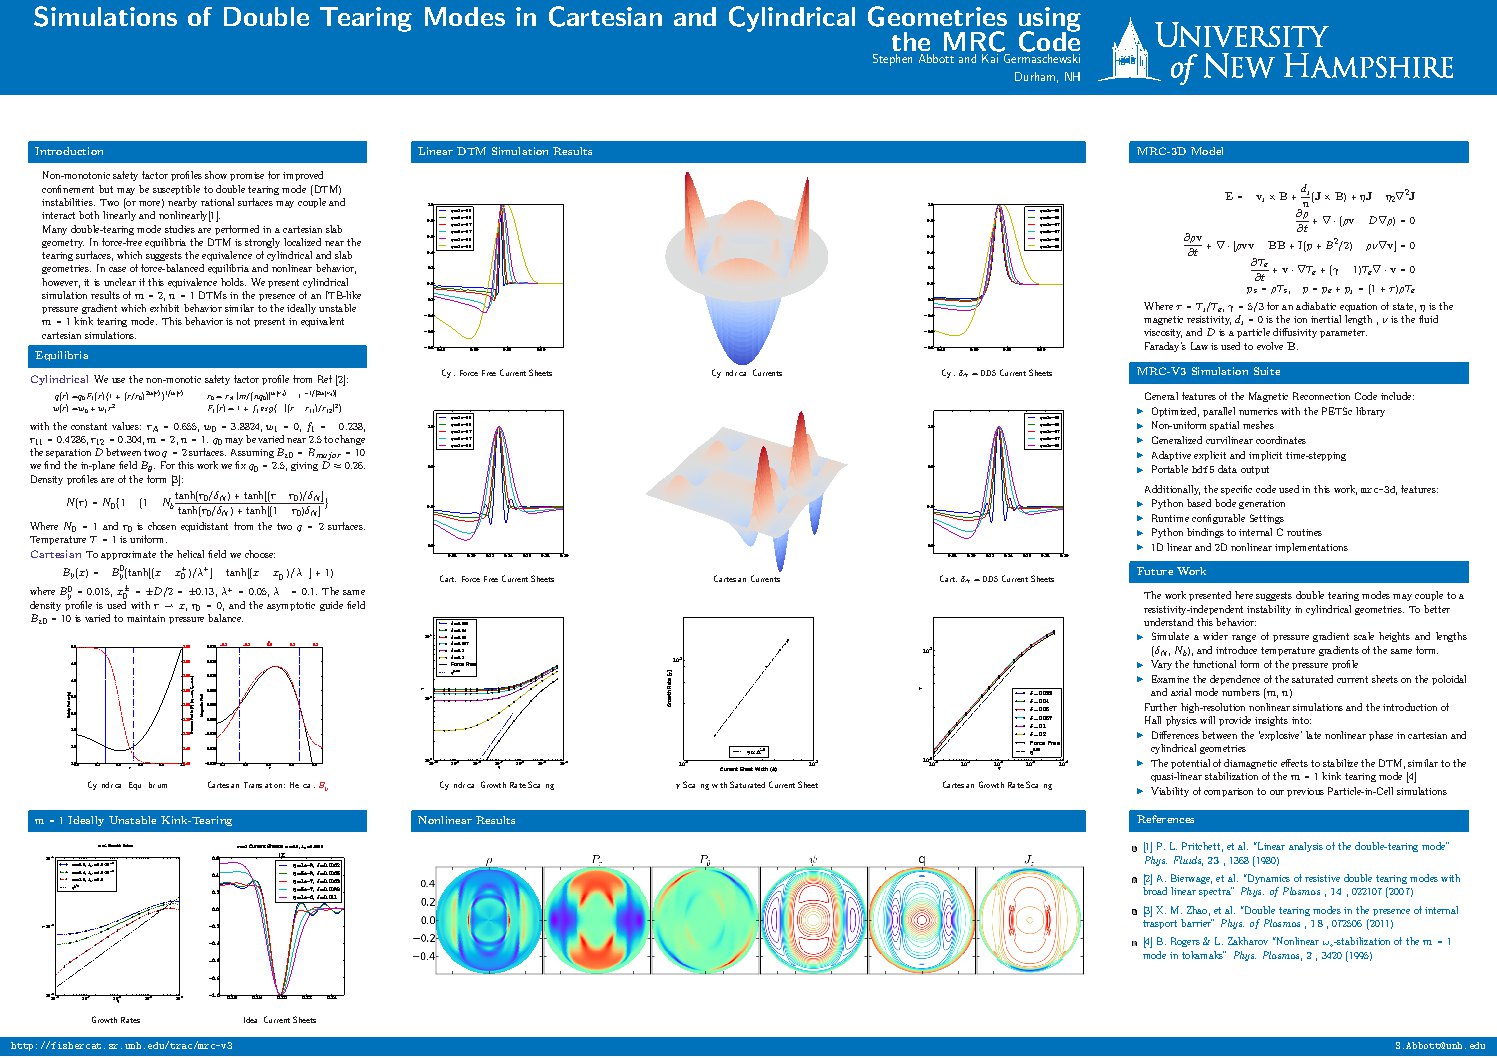 Simulations Of Double Tearing Modes In Cartesian And Cylindrical Geometries Using The Mrc Code by sabbott